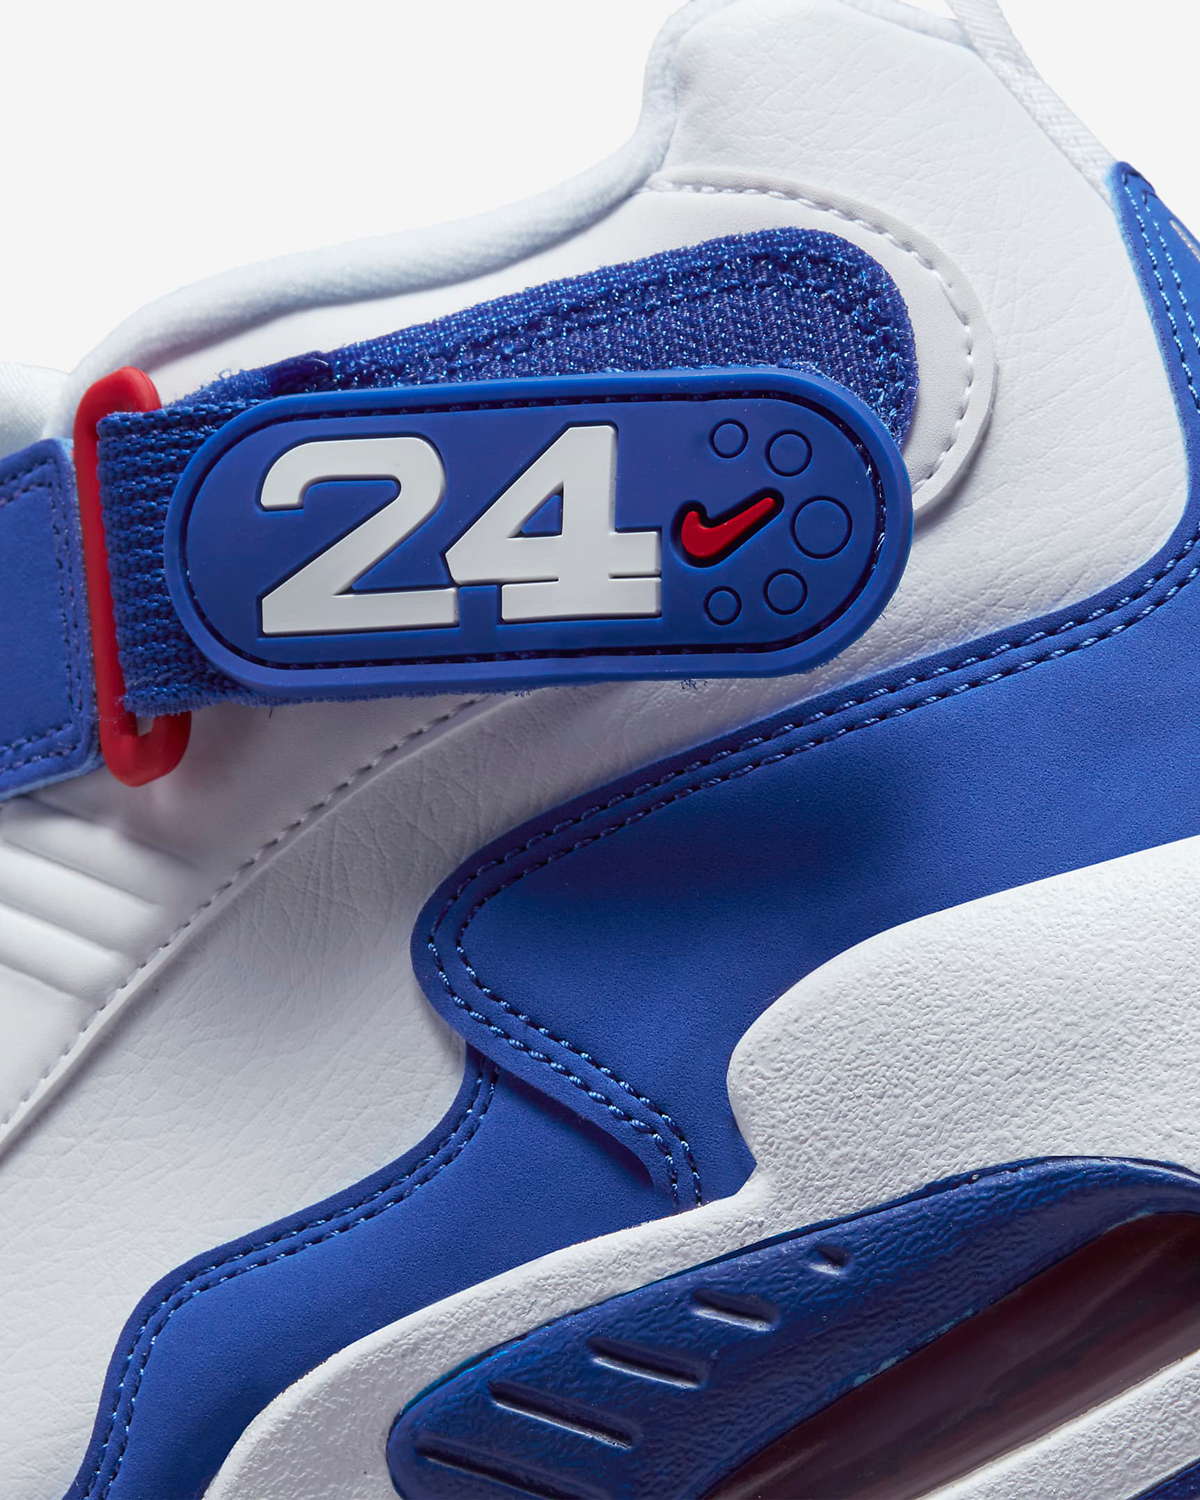 nike-air-griffey-max-1-usa-release-date-9